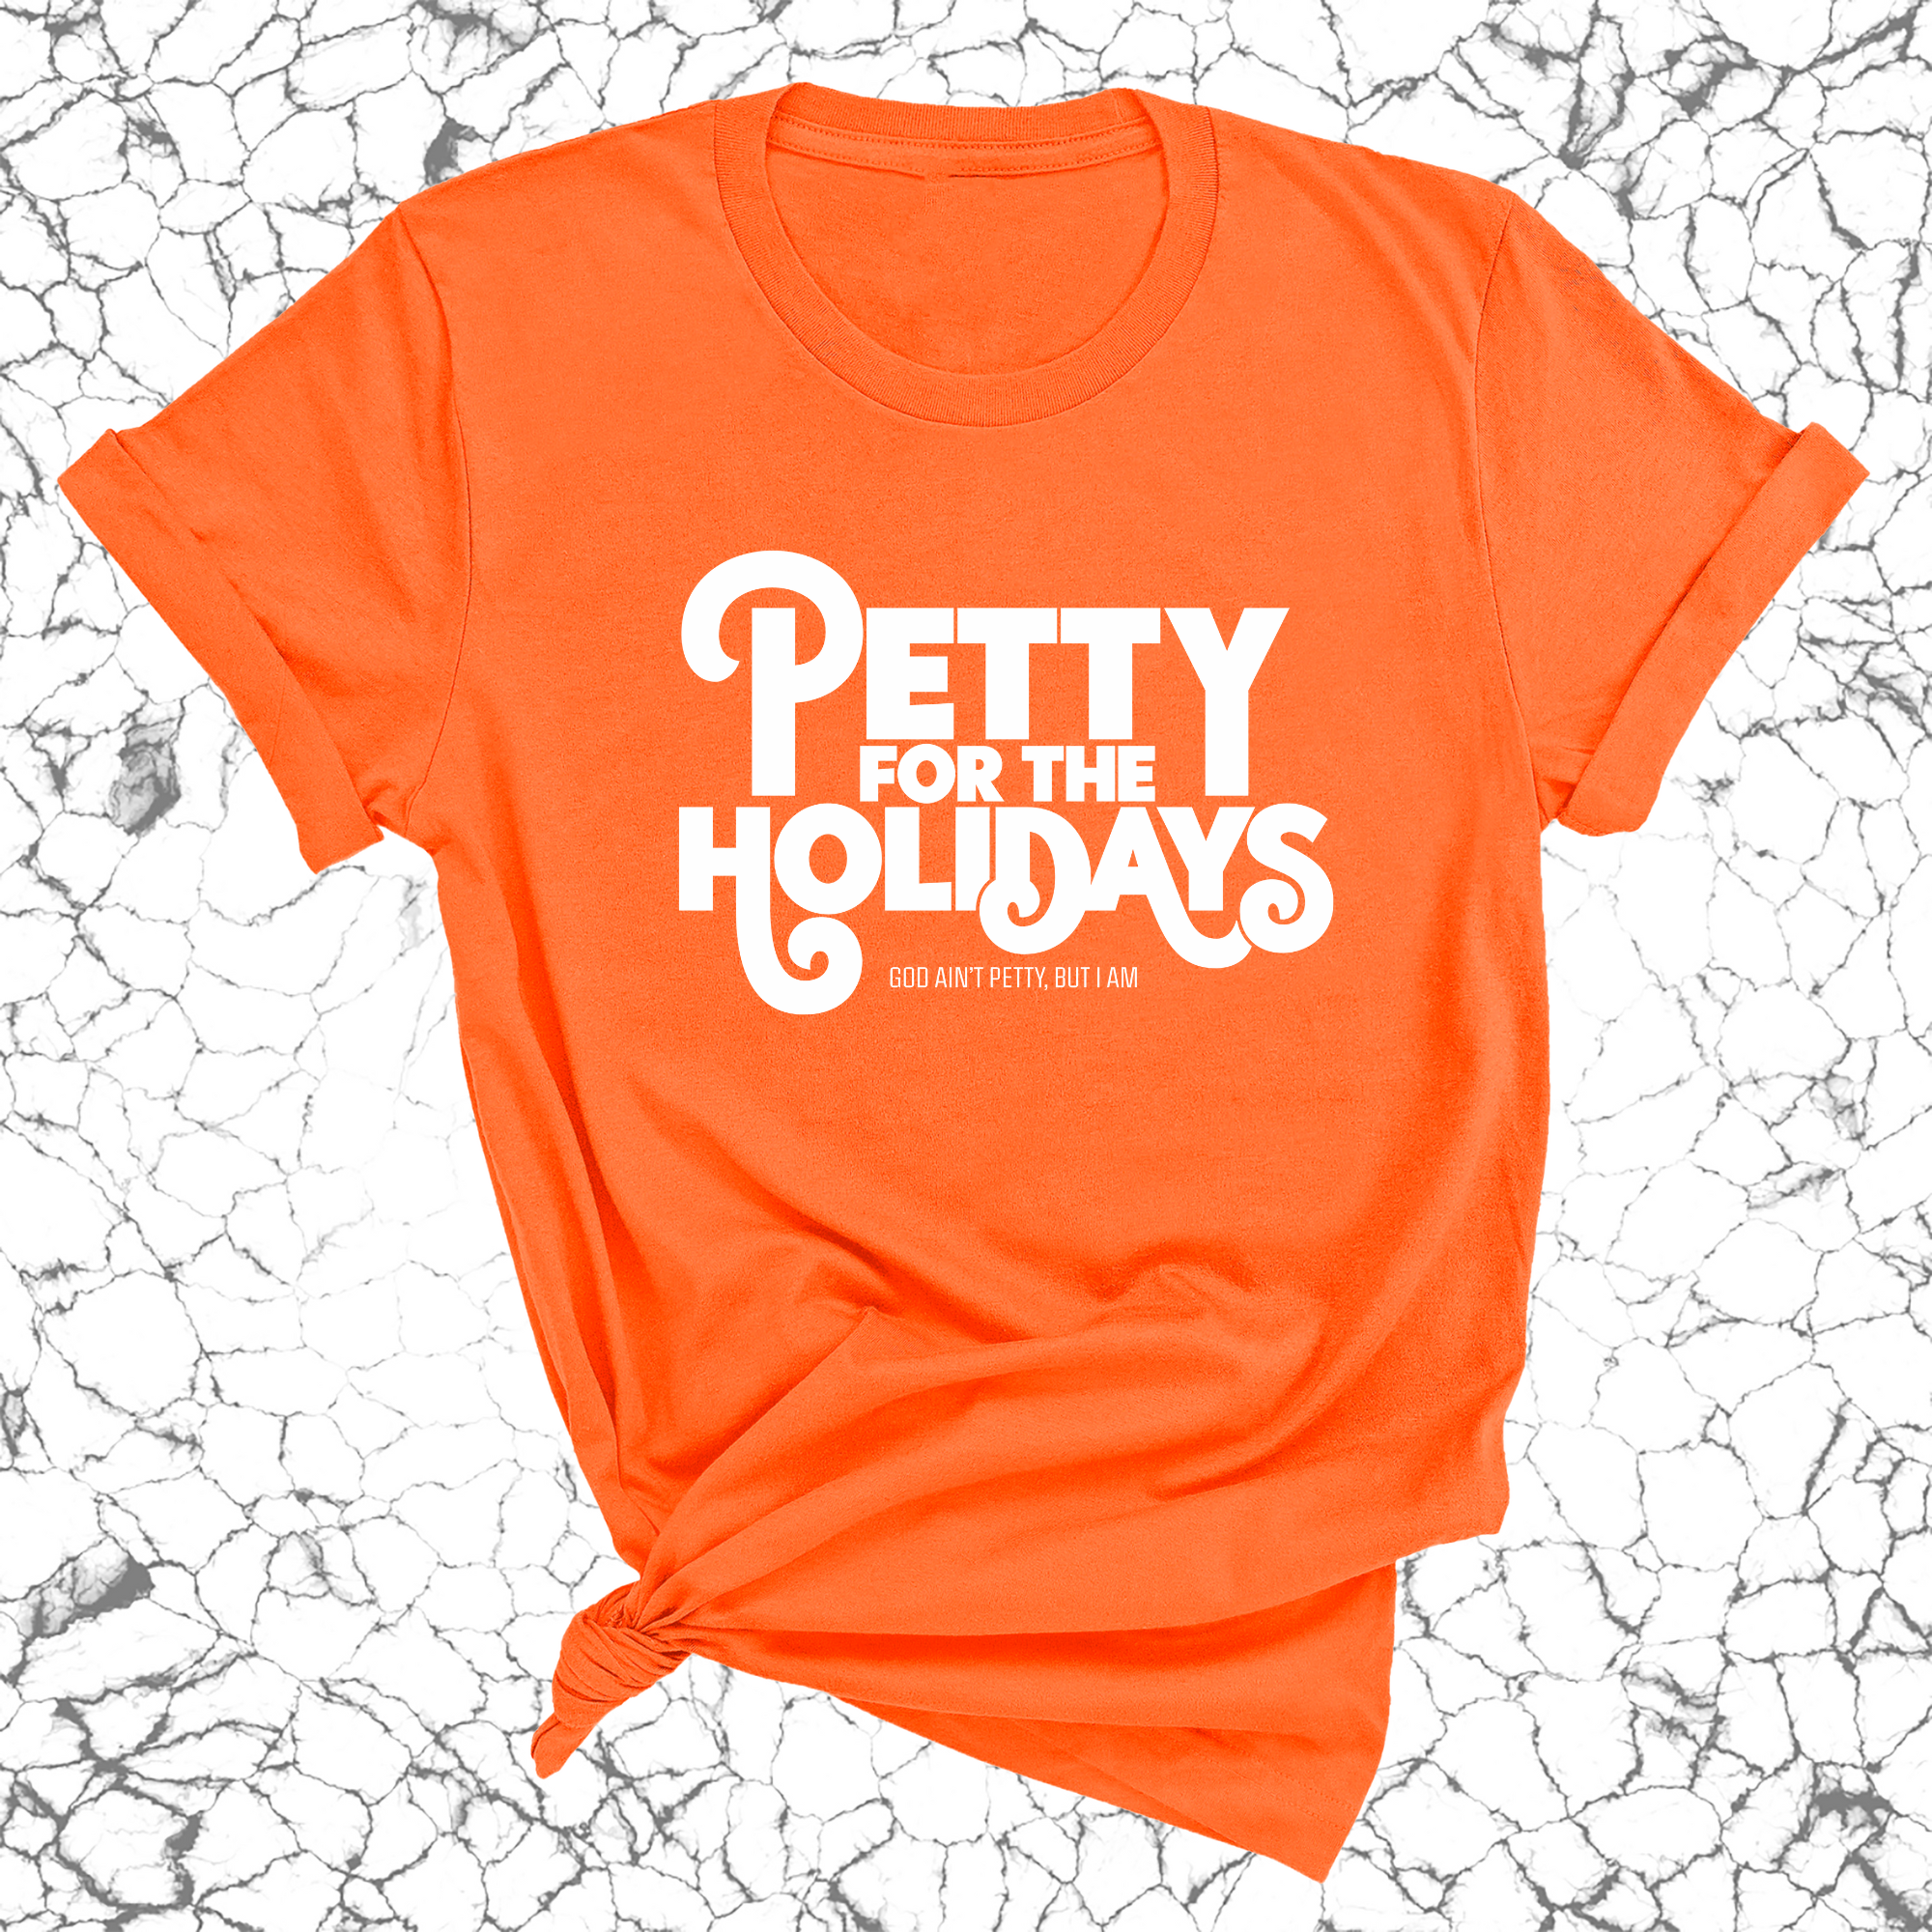 Petty for the Holidays Unisex Tee-T-Shirt-The Original God Ain't Petty But I Am